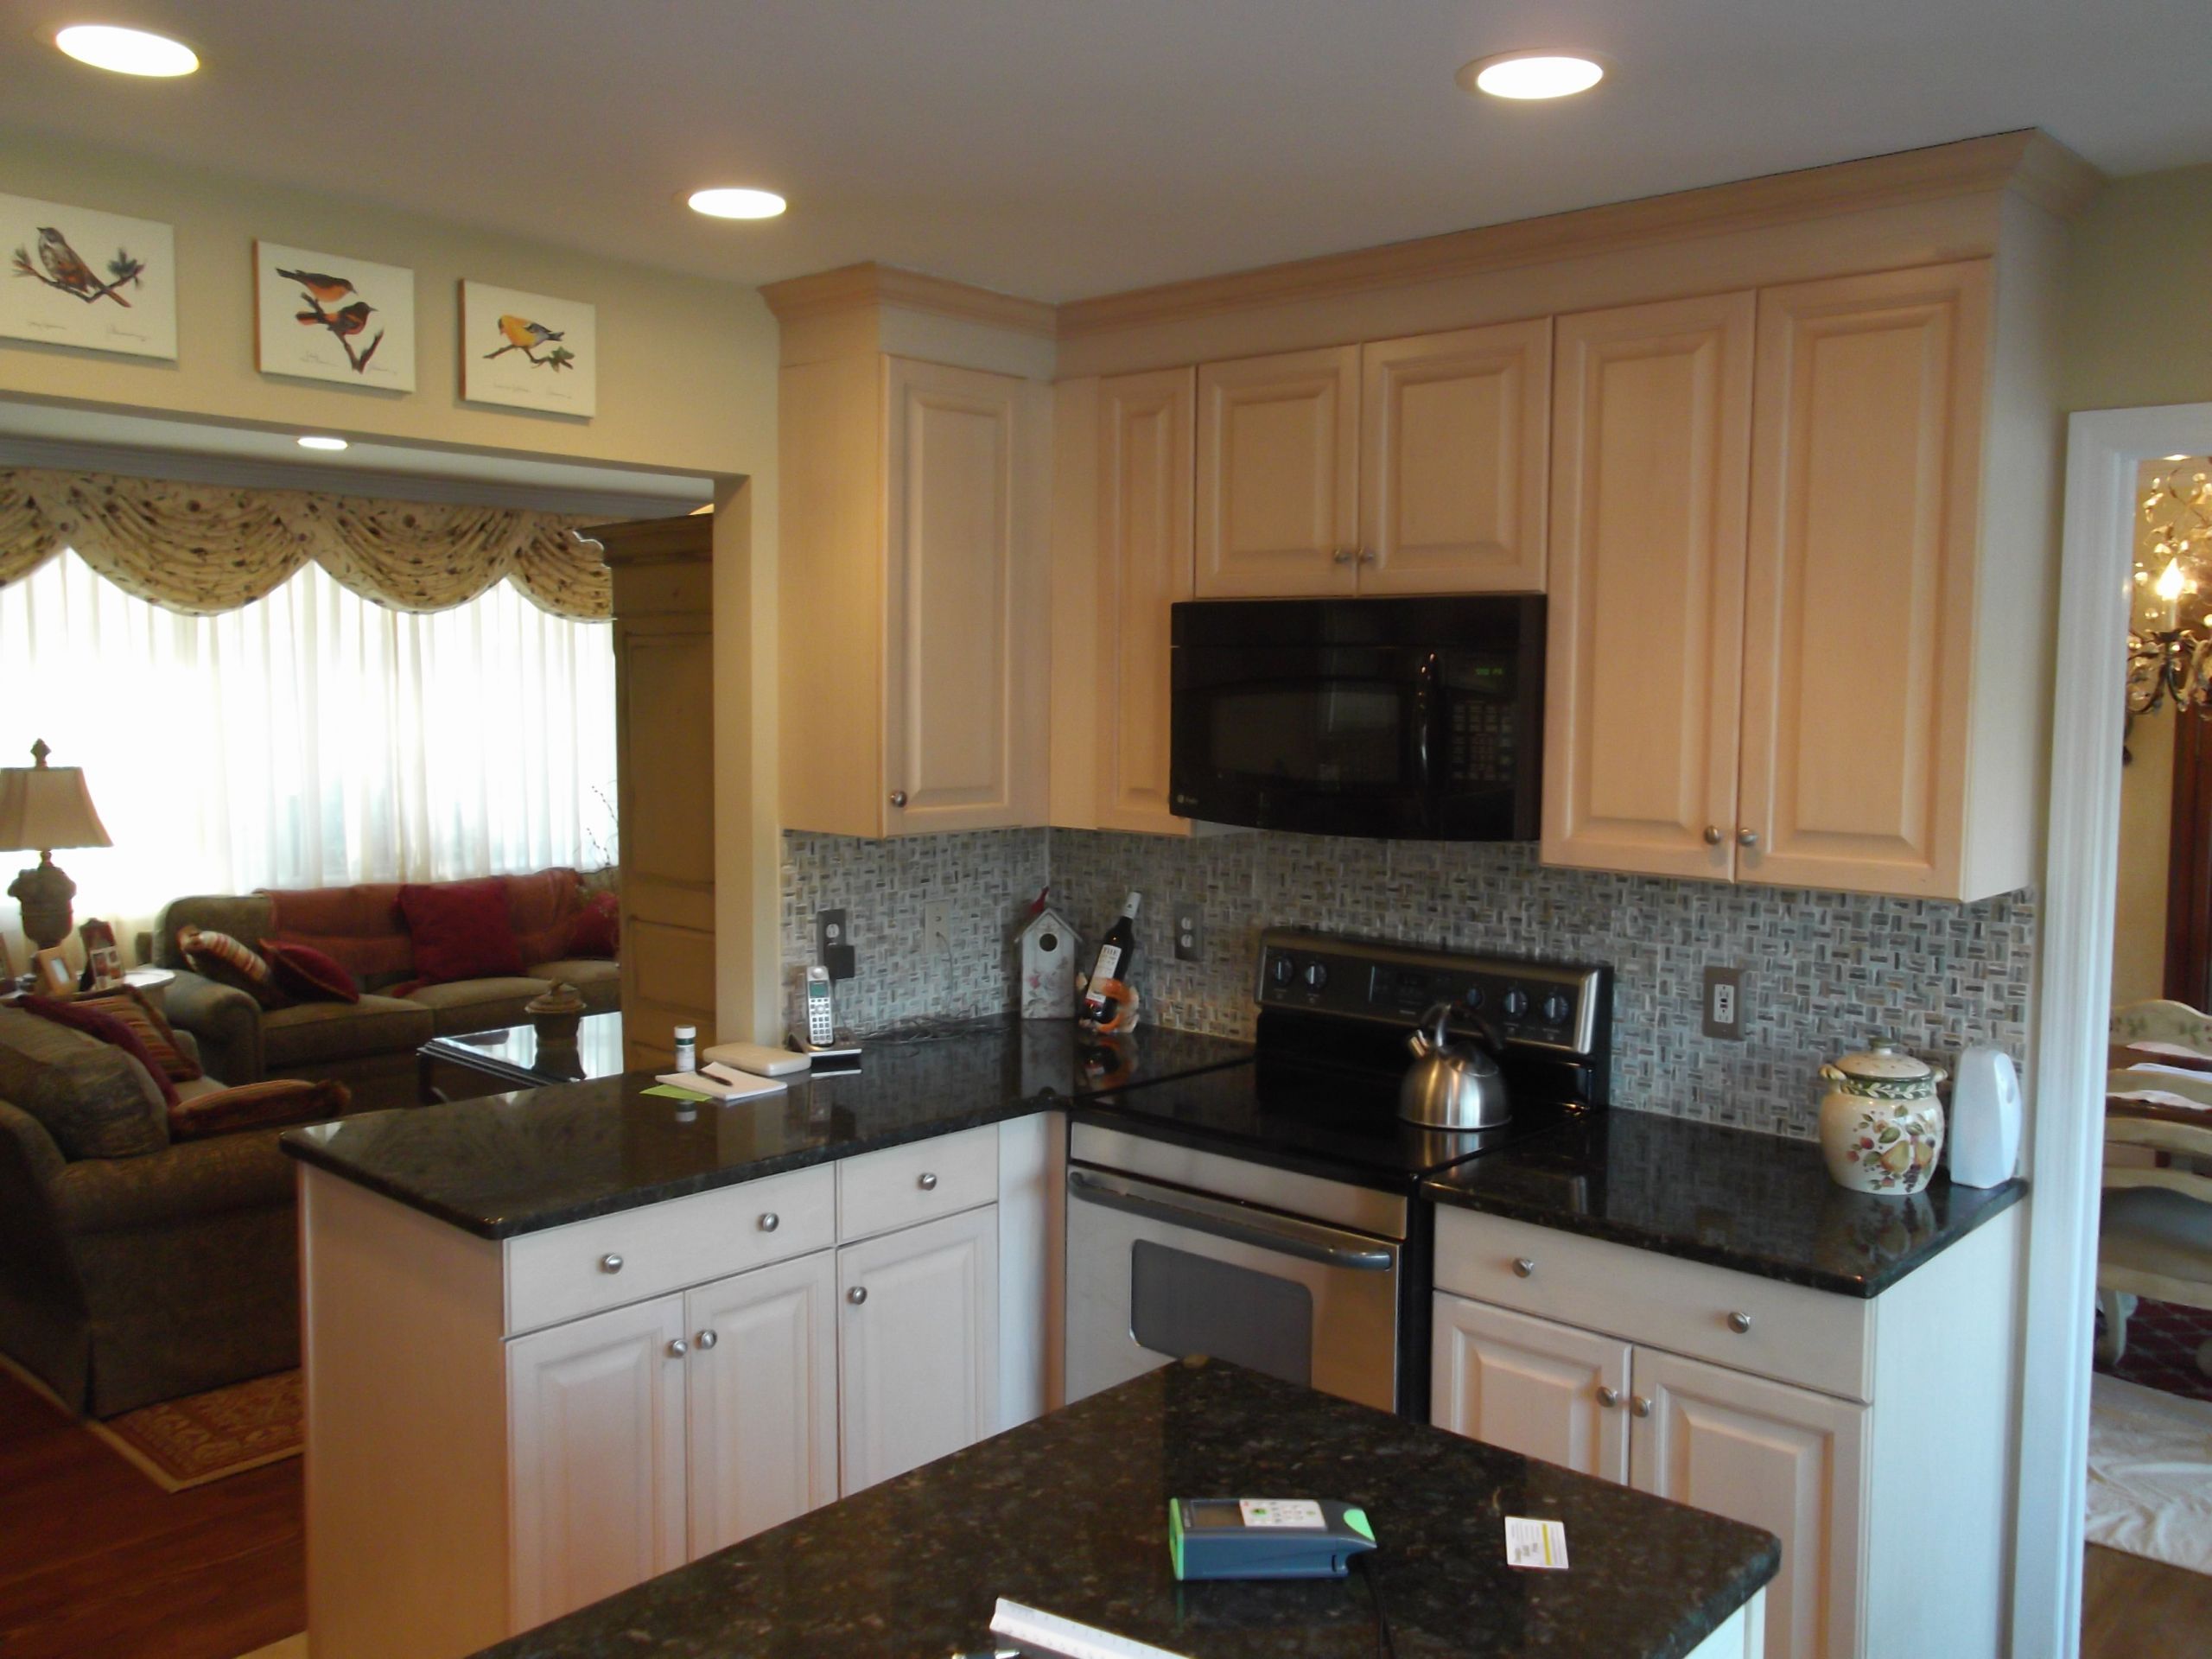 Kitchen Remodeling Planning
 Kitchen Remodeling Design with Open Floor Plan in Watchung